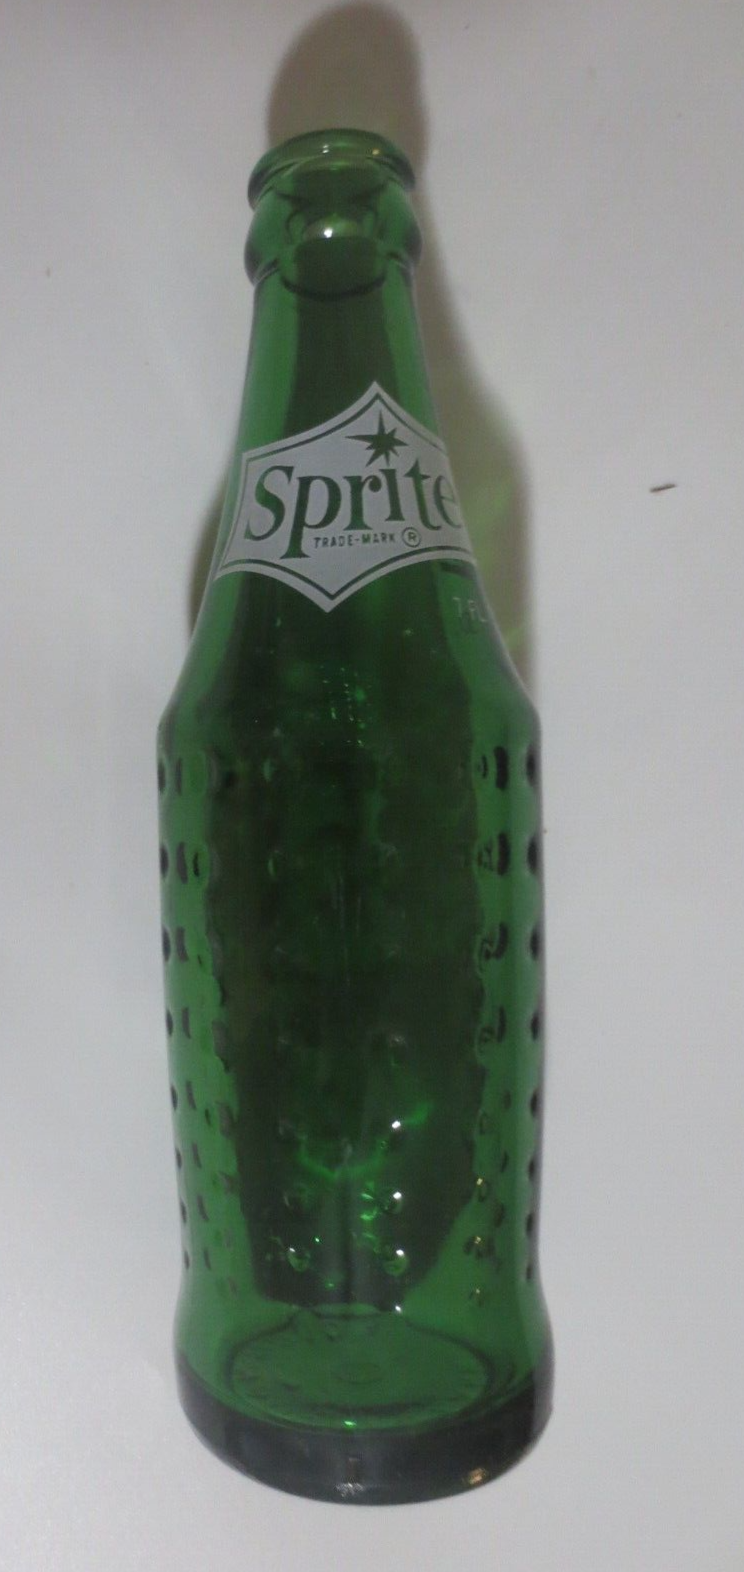 Primary image for Sprite 7oz Green Dimple Bottle Sequoia Nat'l Park on Bottom Excellent Condition